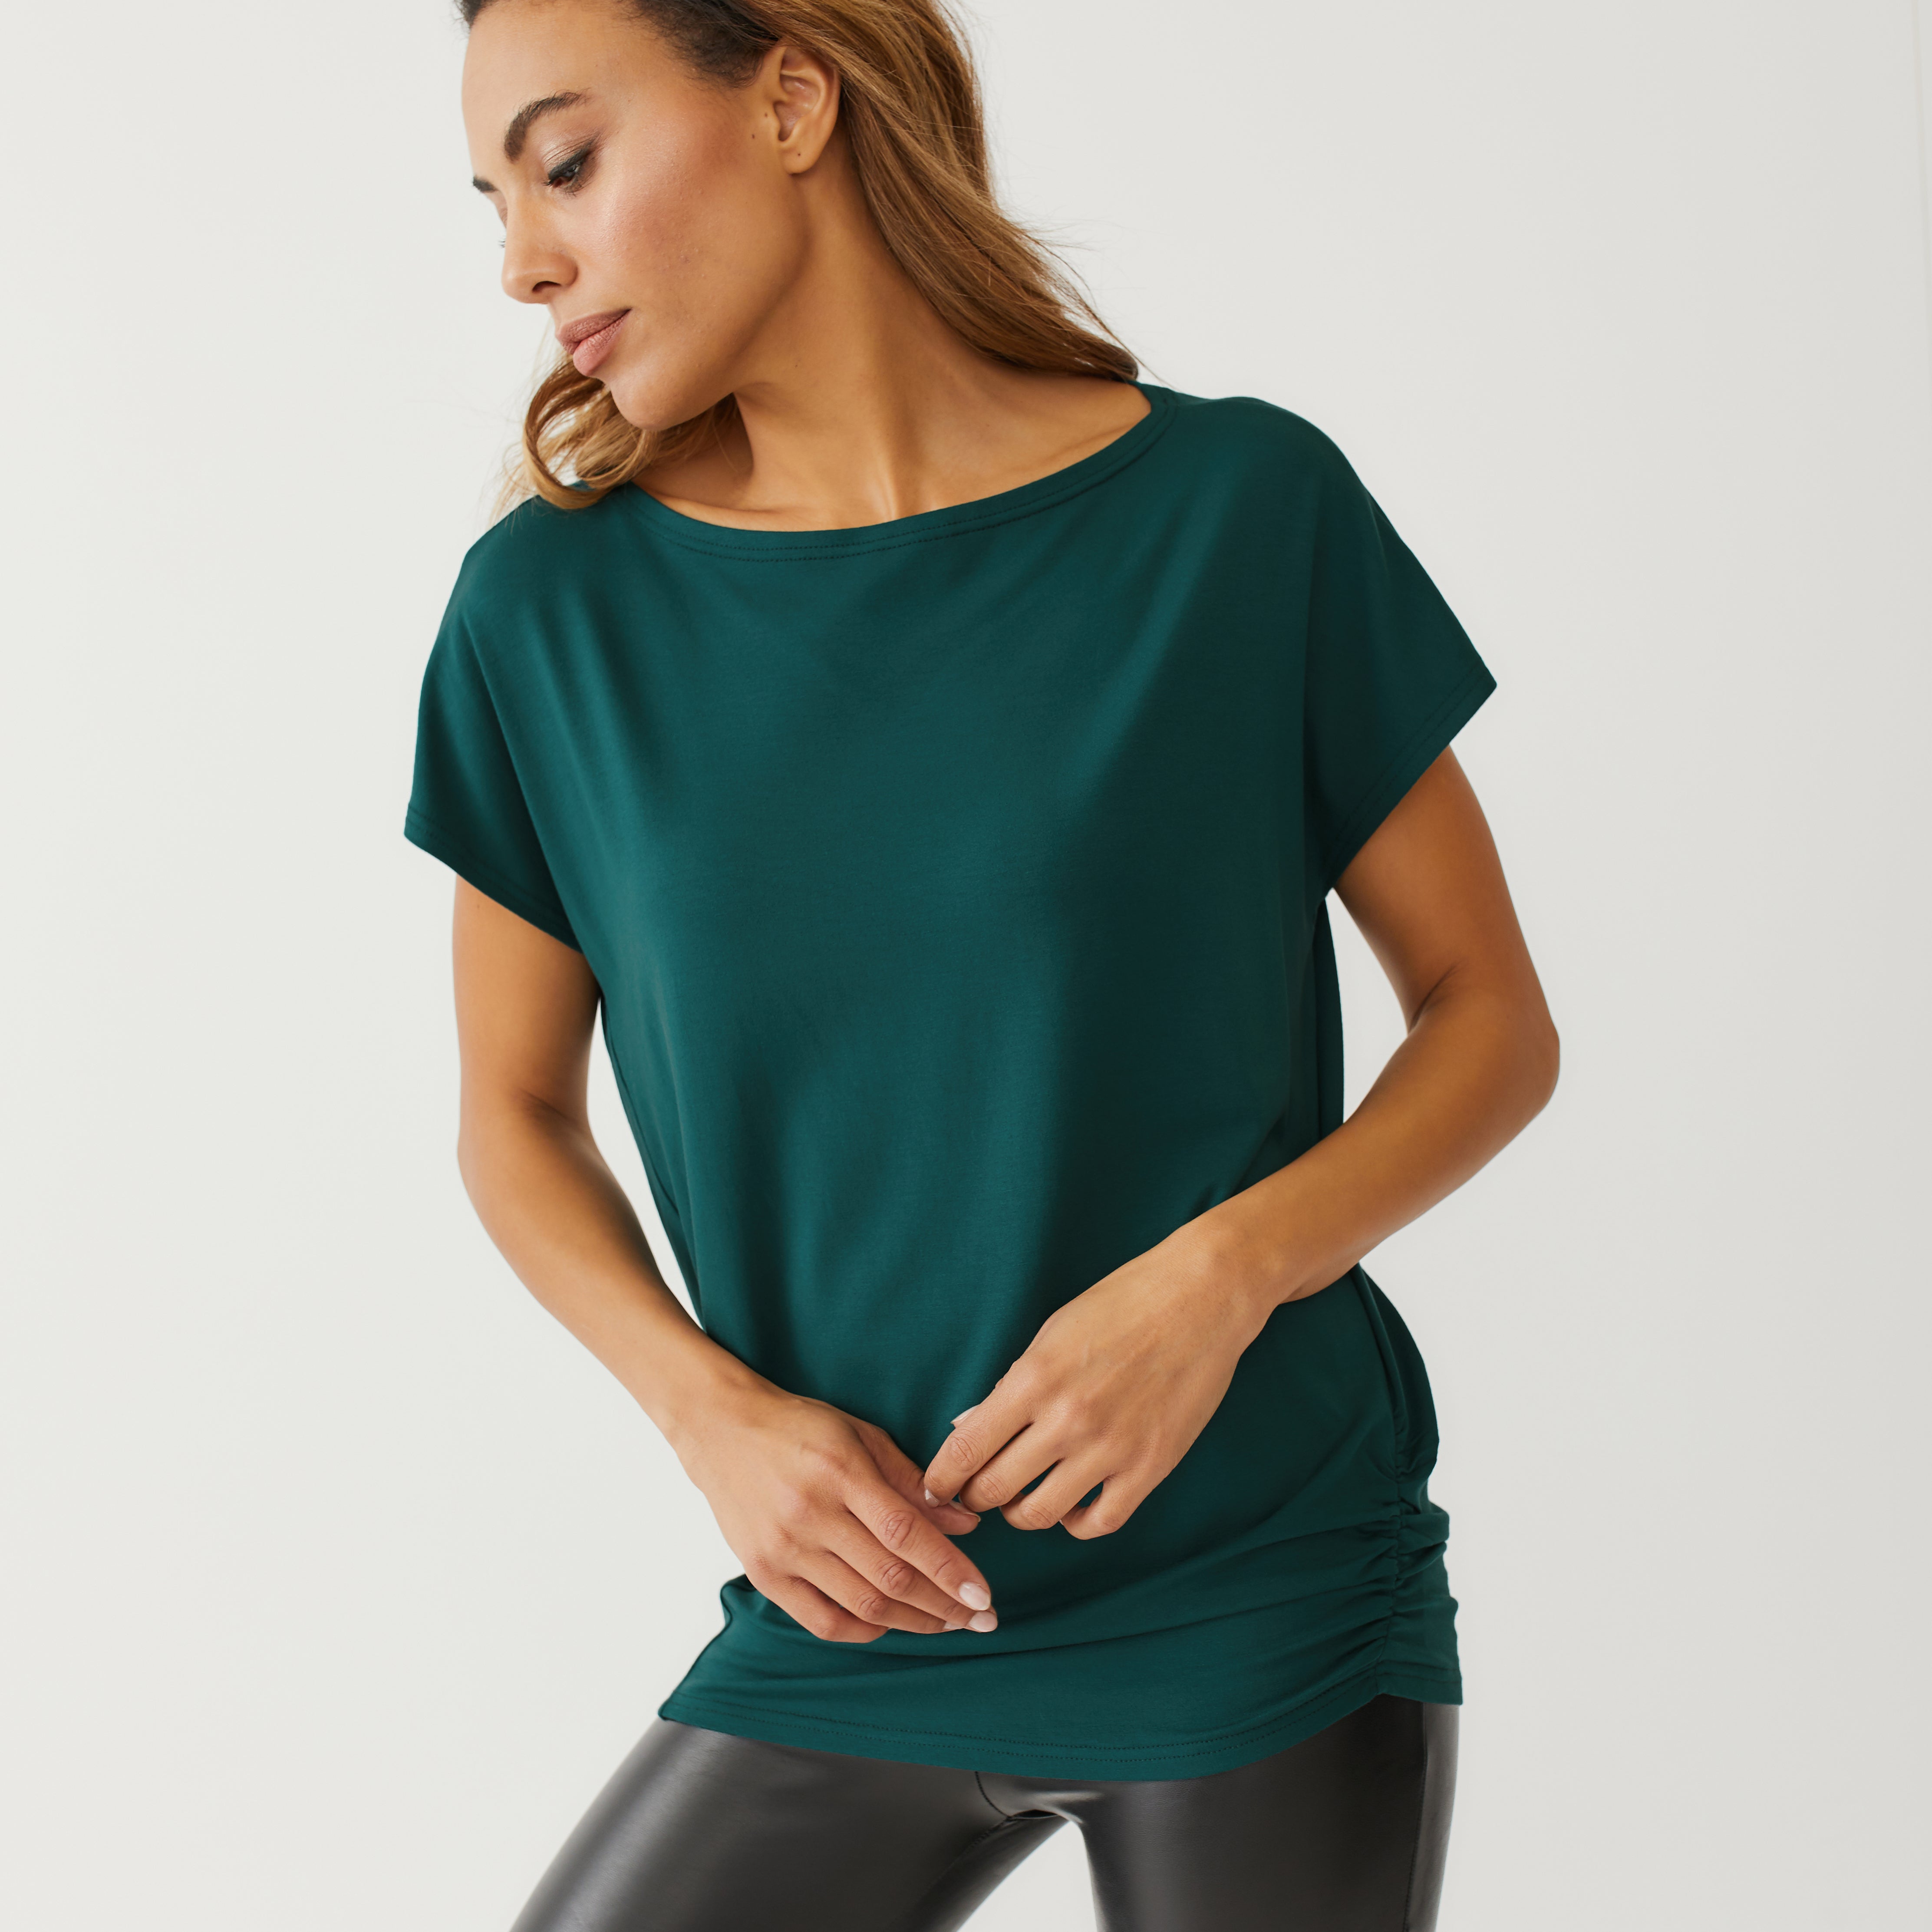 Me & Thee oversized tee in emerald green bamboo jersey with ruche detailing to the hemline